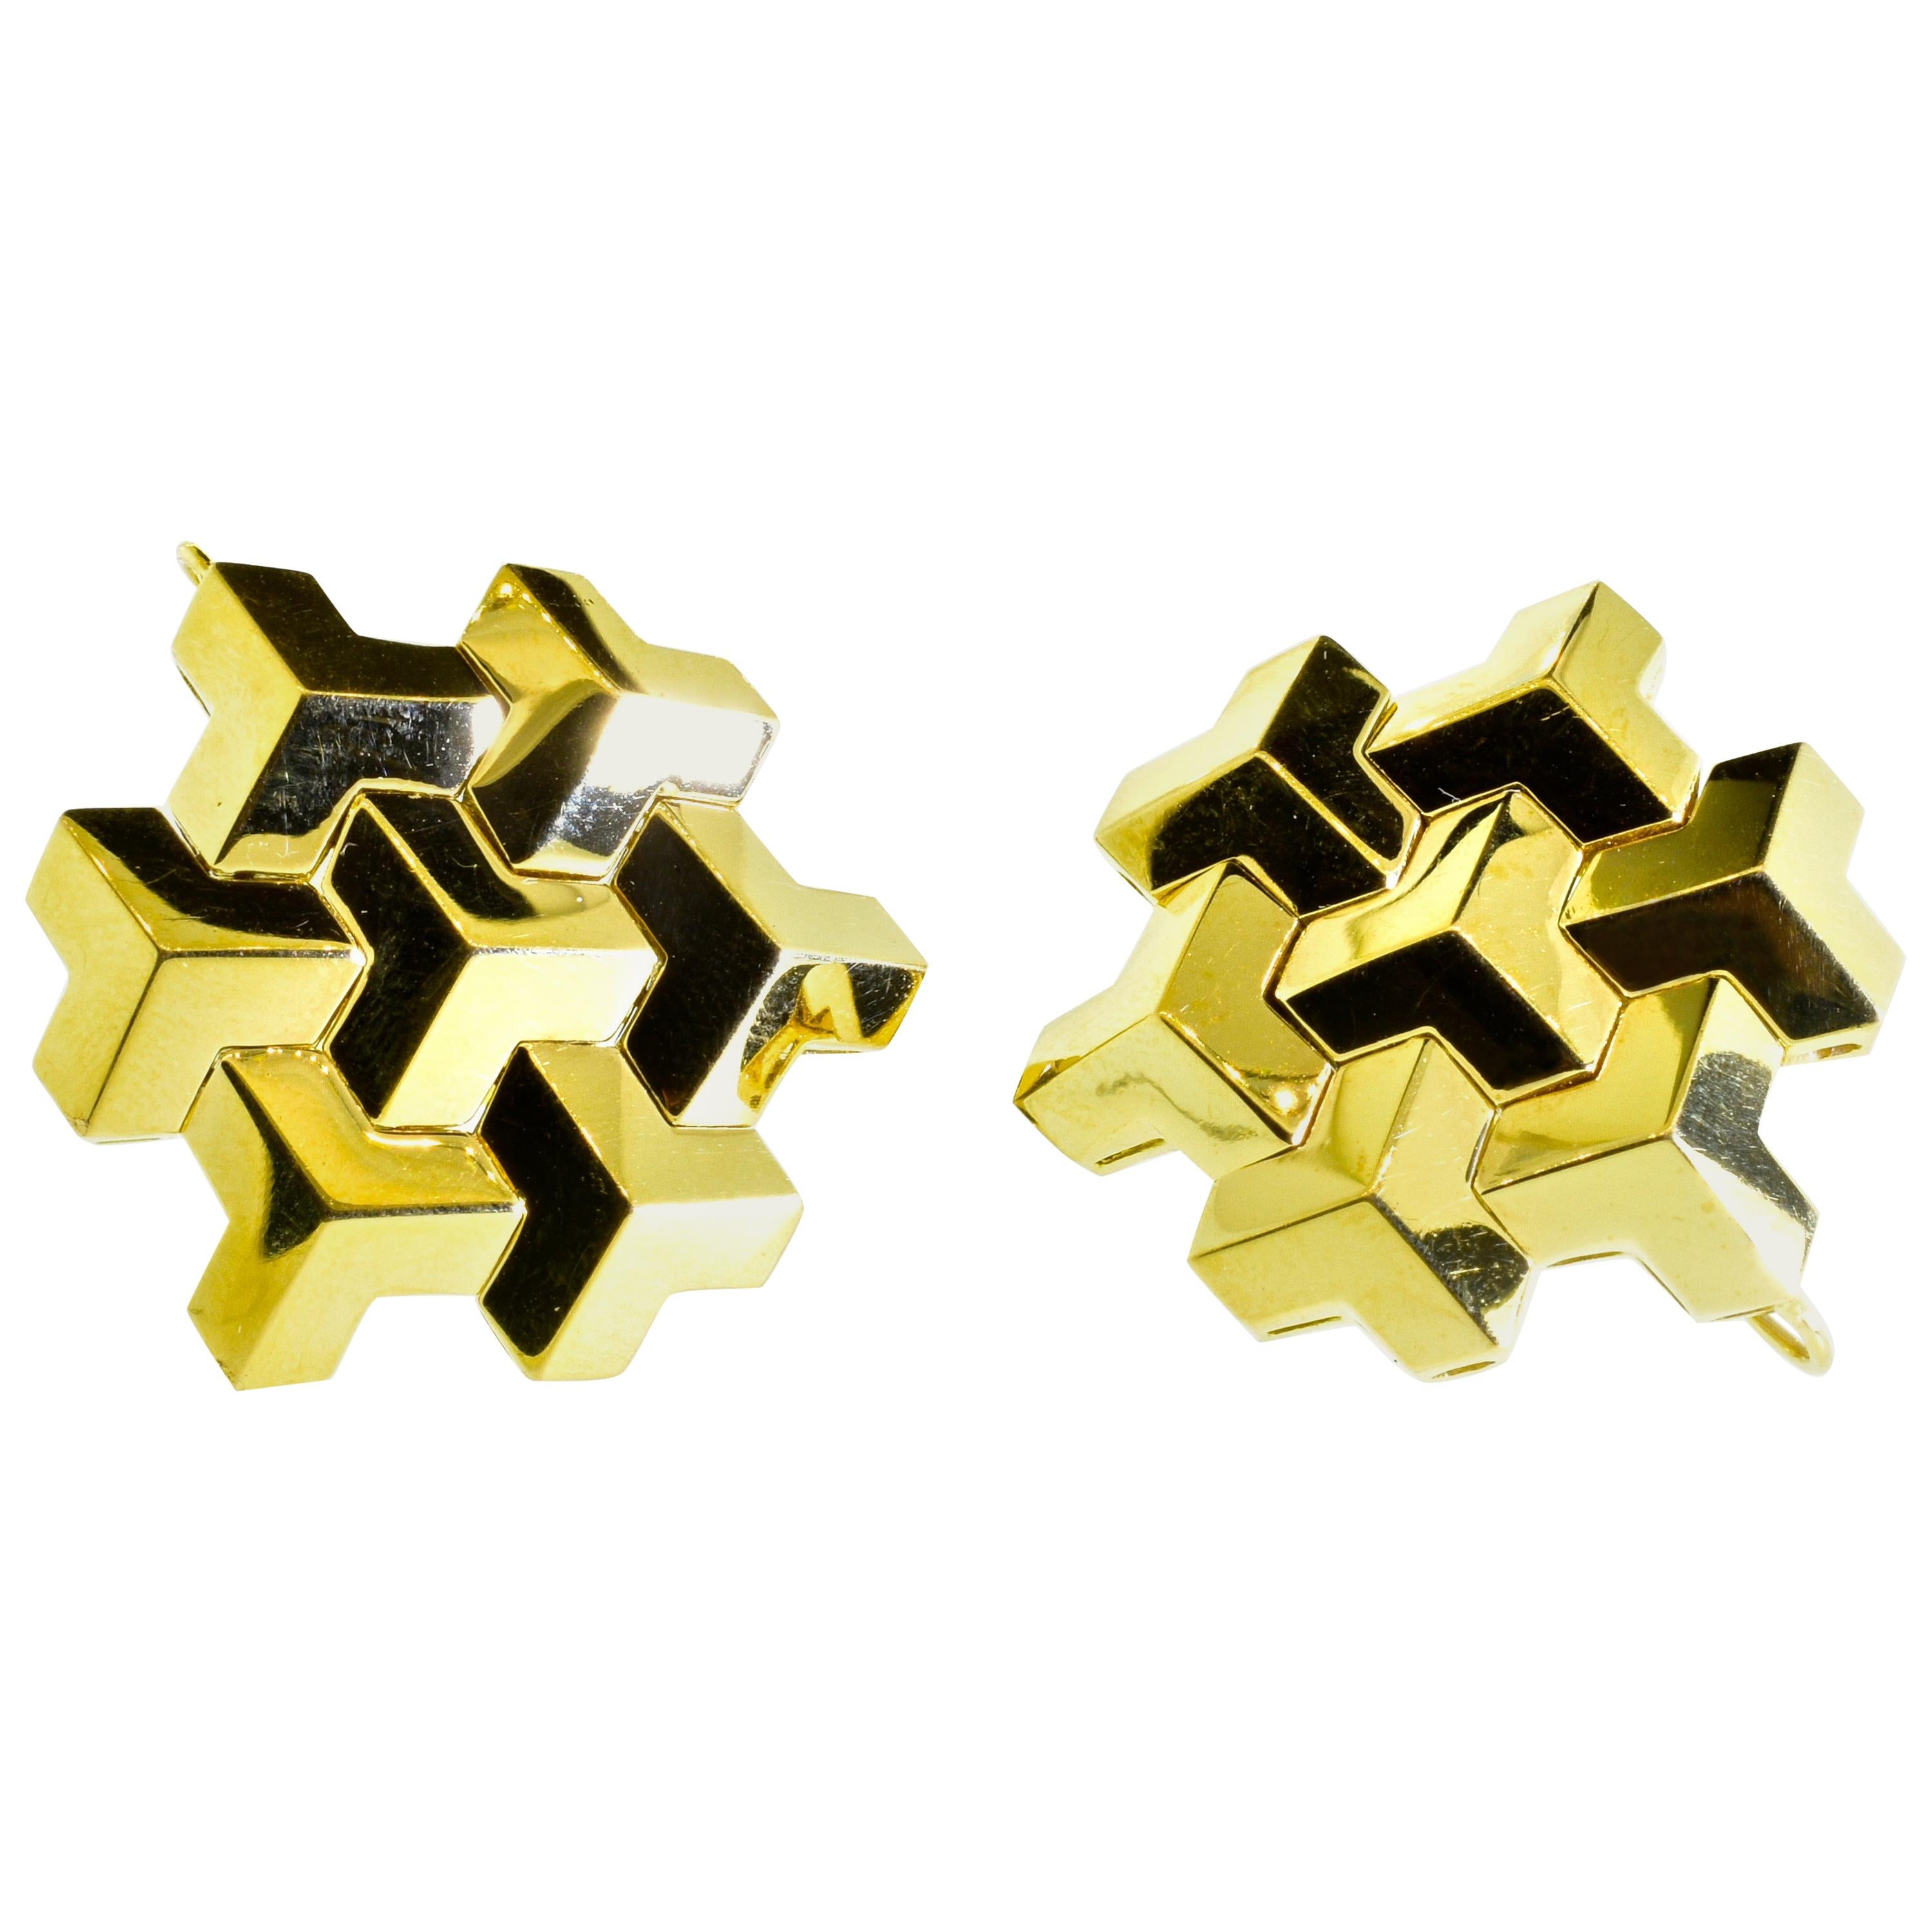 18K contemporary earrings from the famous designer Paolo Costagli. These earrings are the largest size made, they've  also have a hook at the bottom so that one can wear a pendant element  making the earrings more dramatic for nighttime.  The